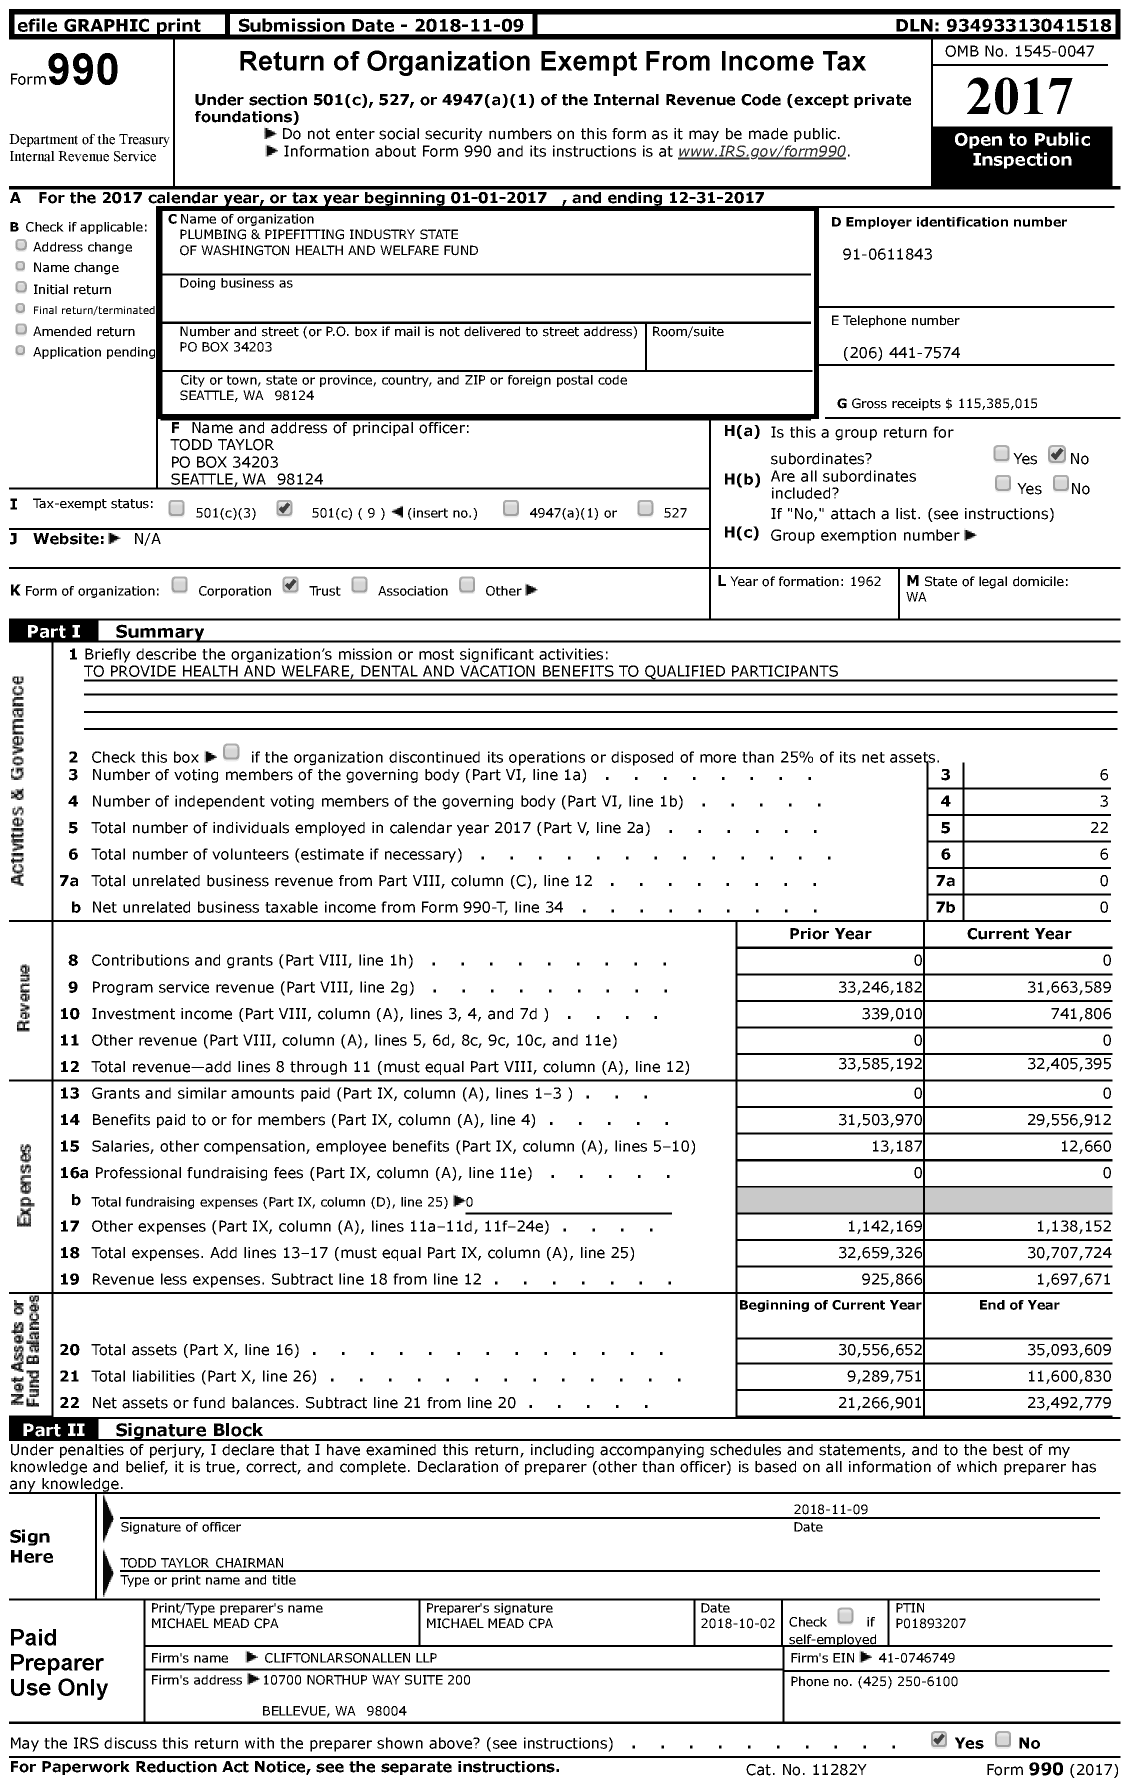 Image of first page of 2017 Form 990 for Plumbing and Pipefitting Industry State of Washington Health and Welfare Fund